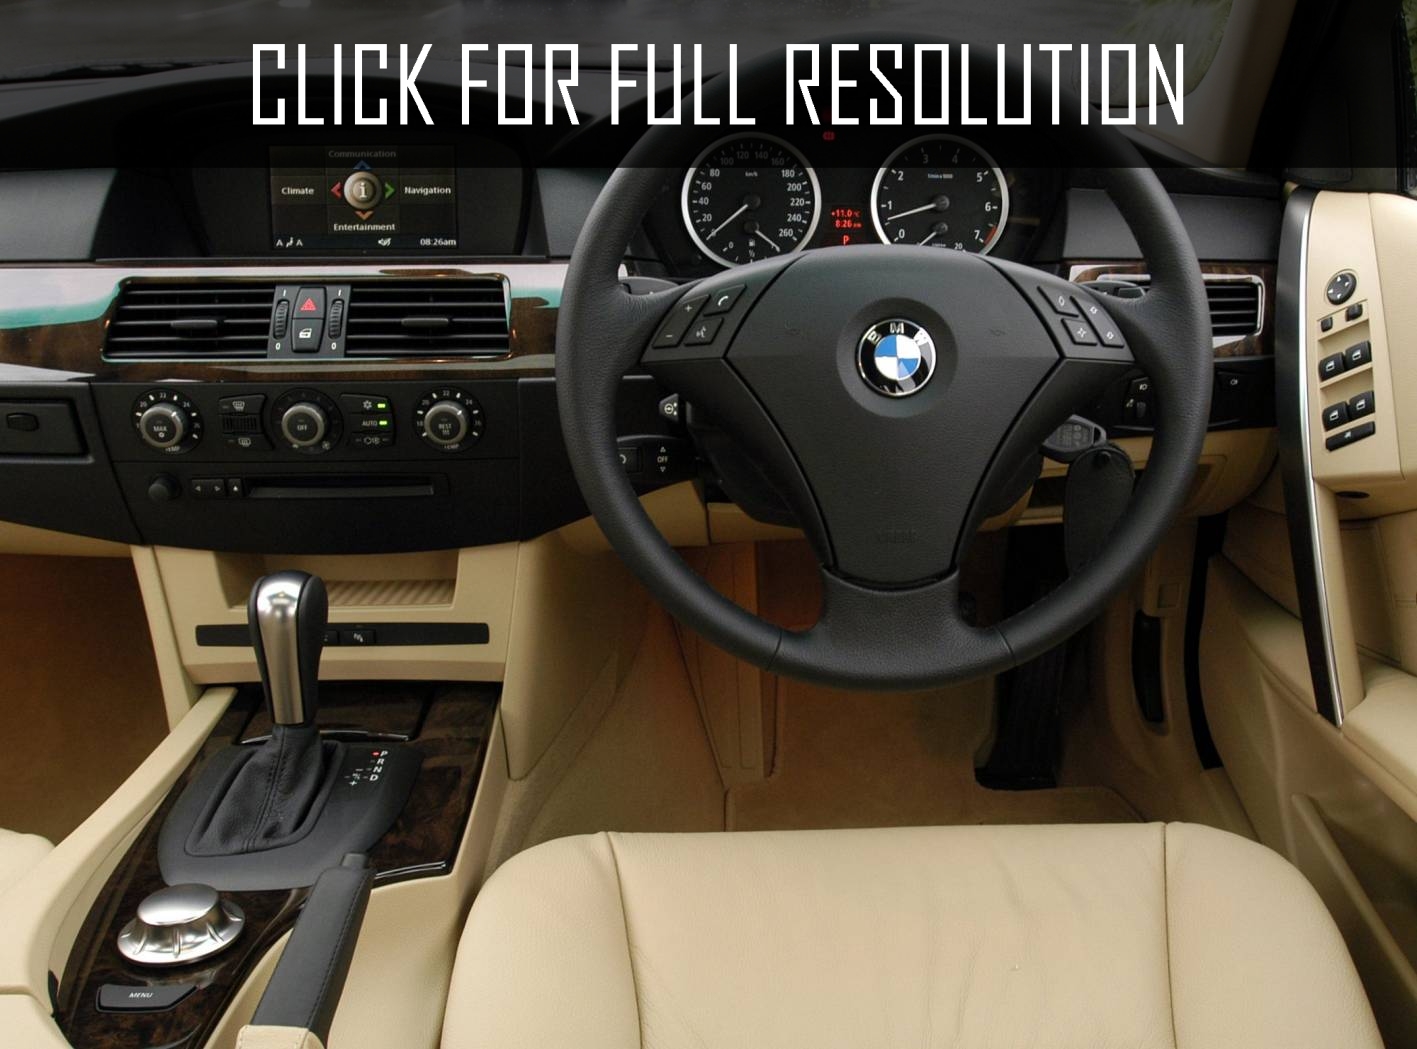 2004 Bmw 525i E60 Best Image Gallery 13 14 Share And Download